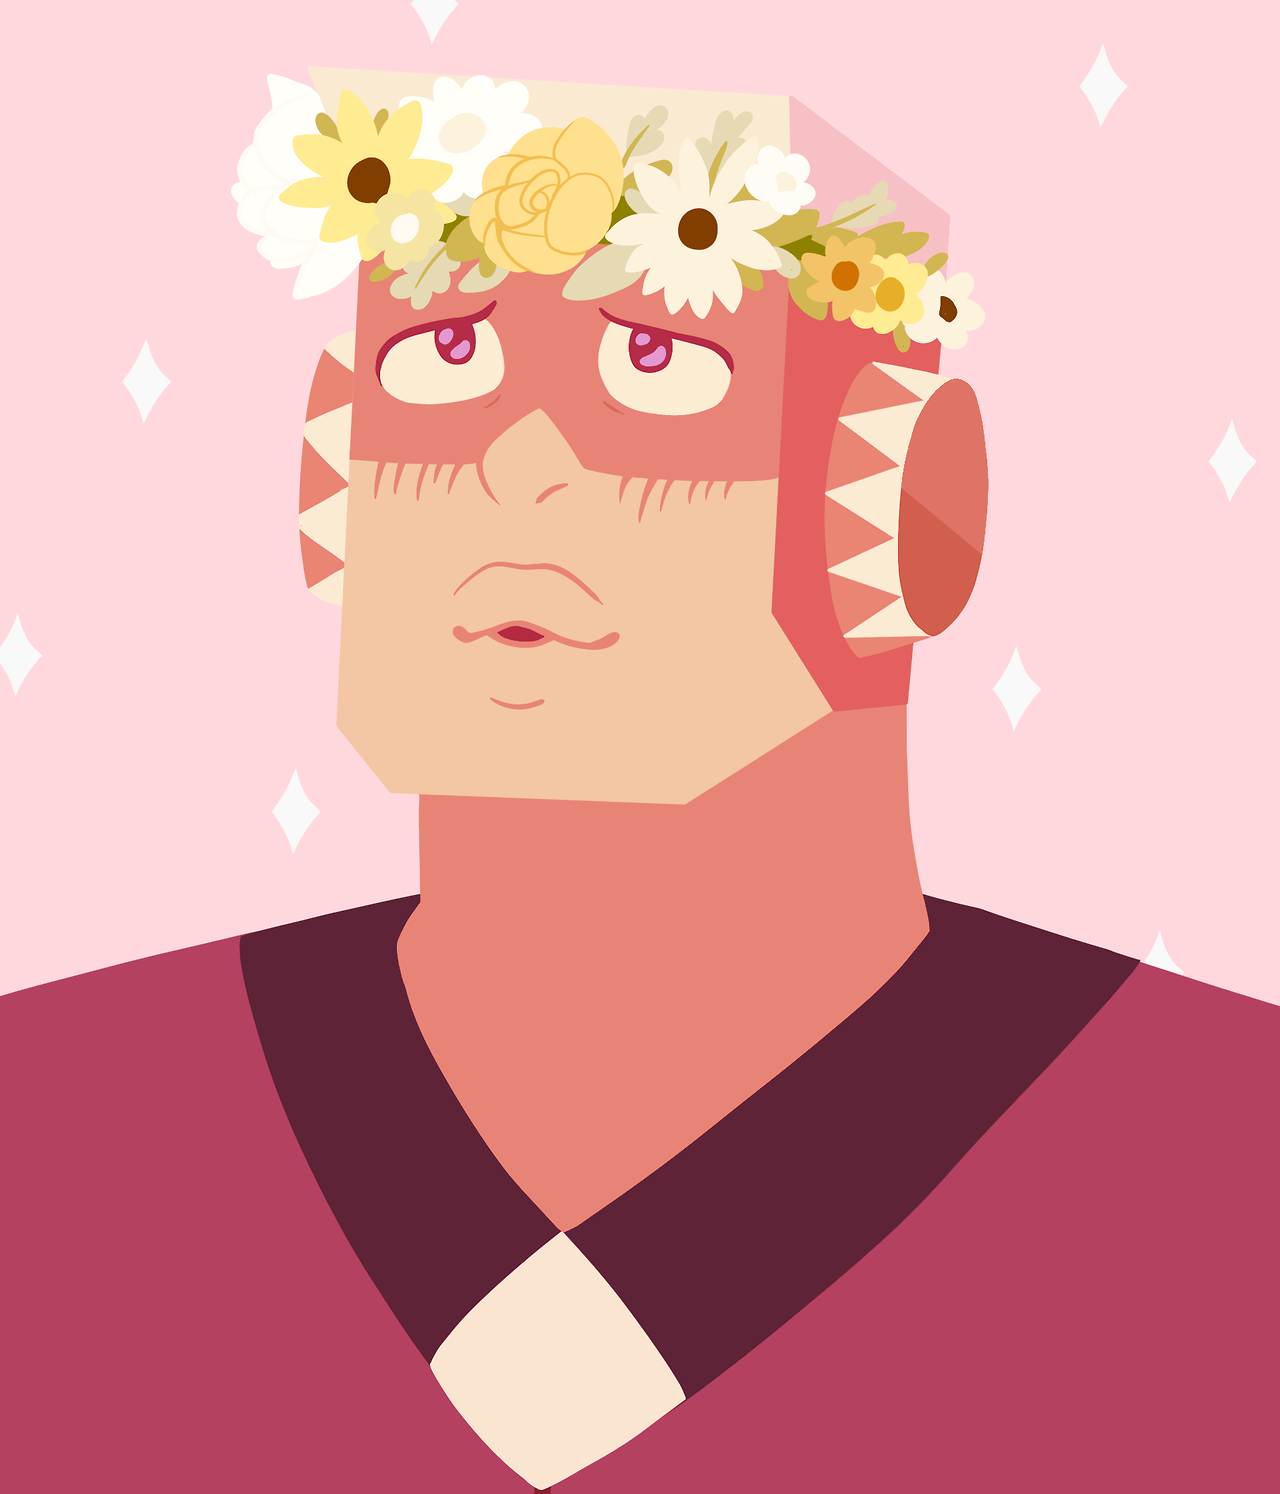 Flower crowns are still a fun and cool trend, right? Steven must have made it for her, because shes currently safe and happy on Earth, right? Right?? (Anyways i made this to be an icon but i picked...